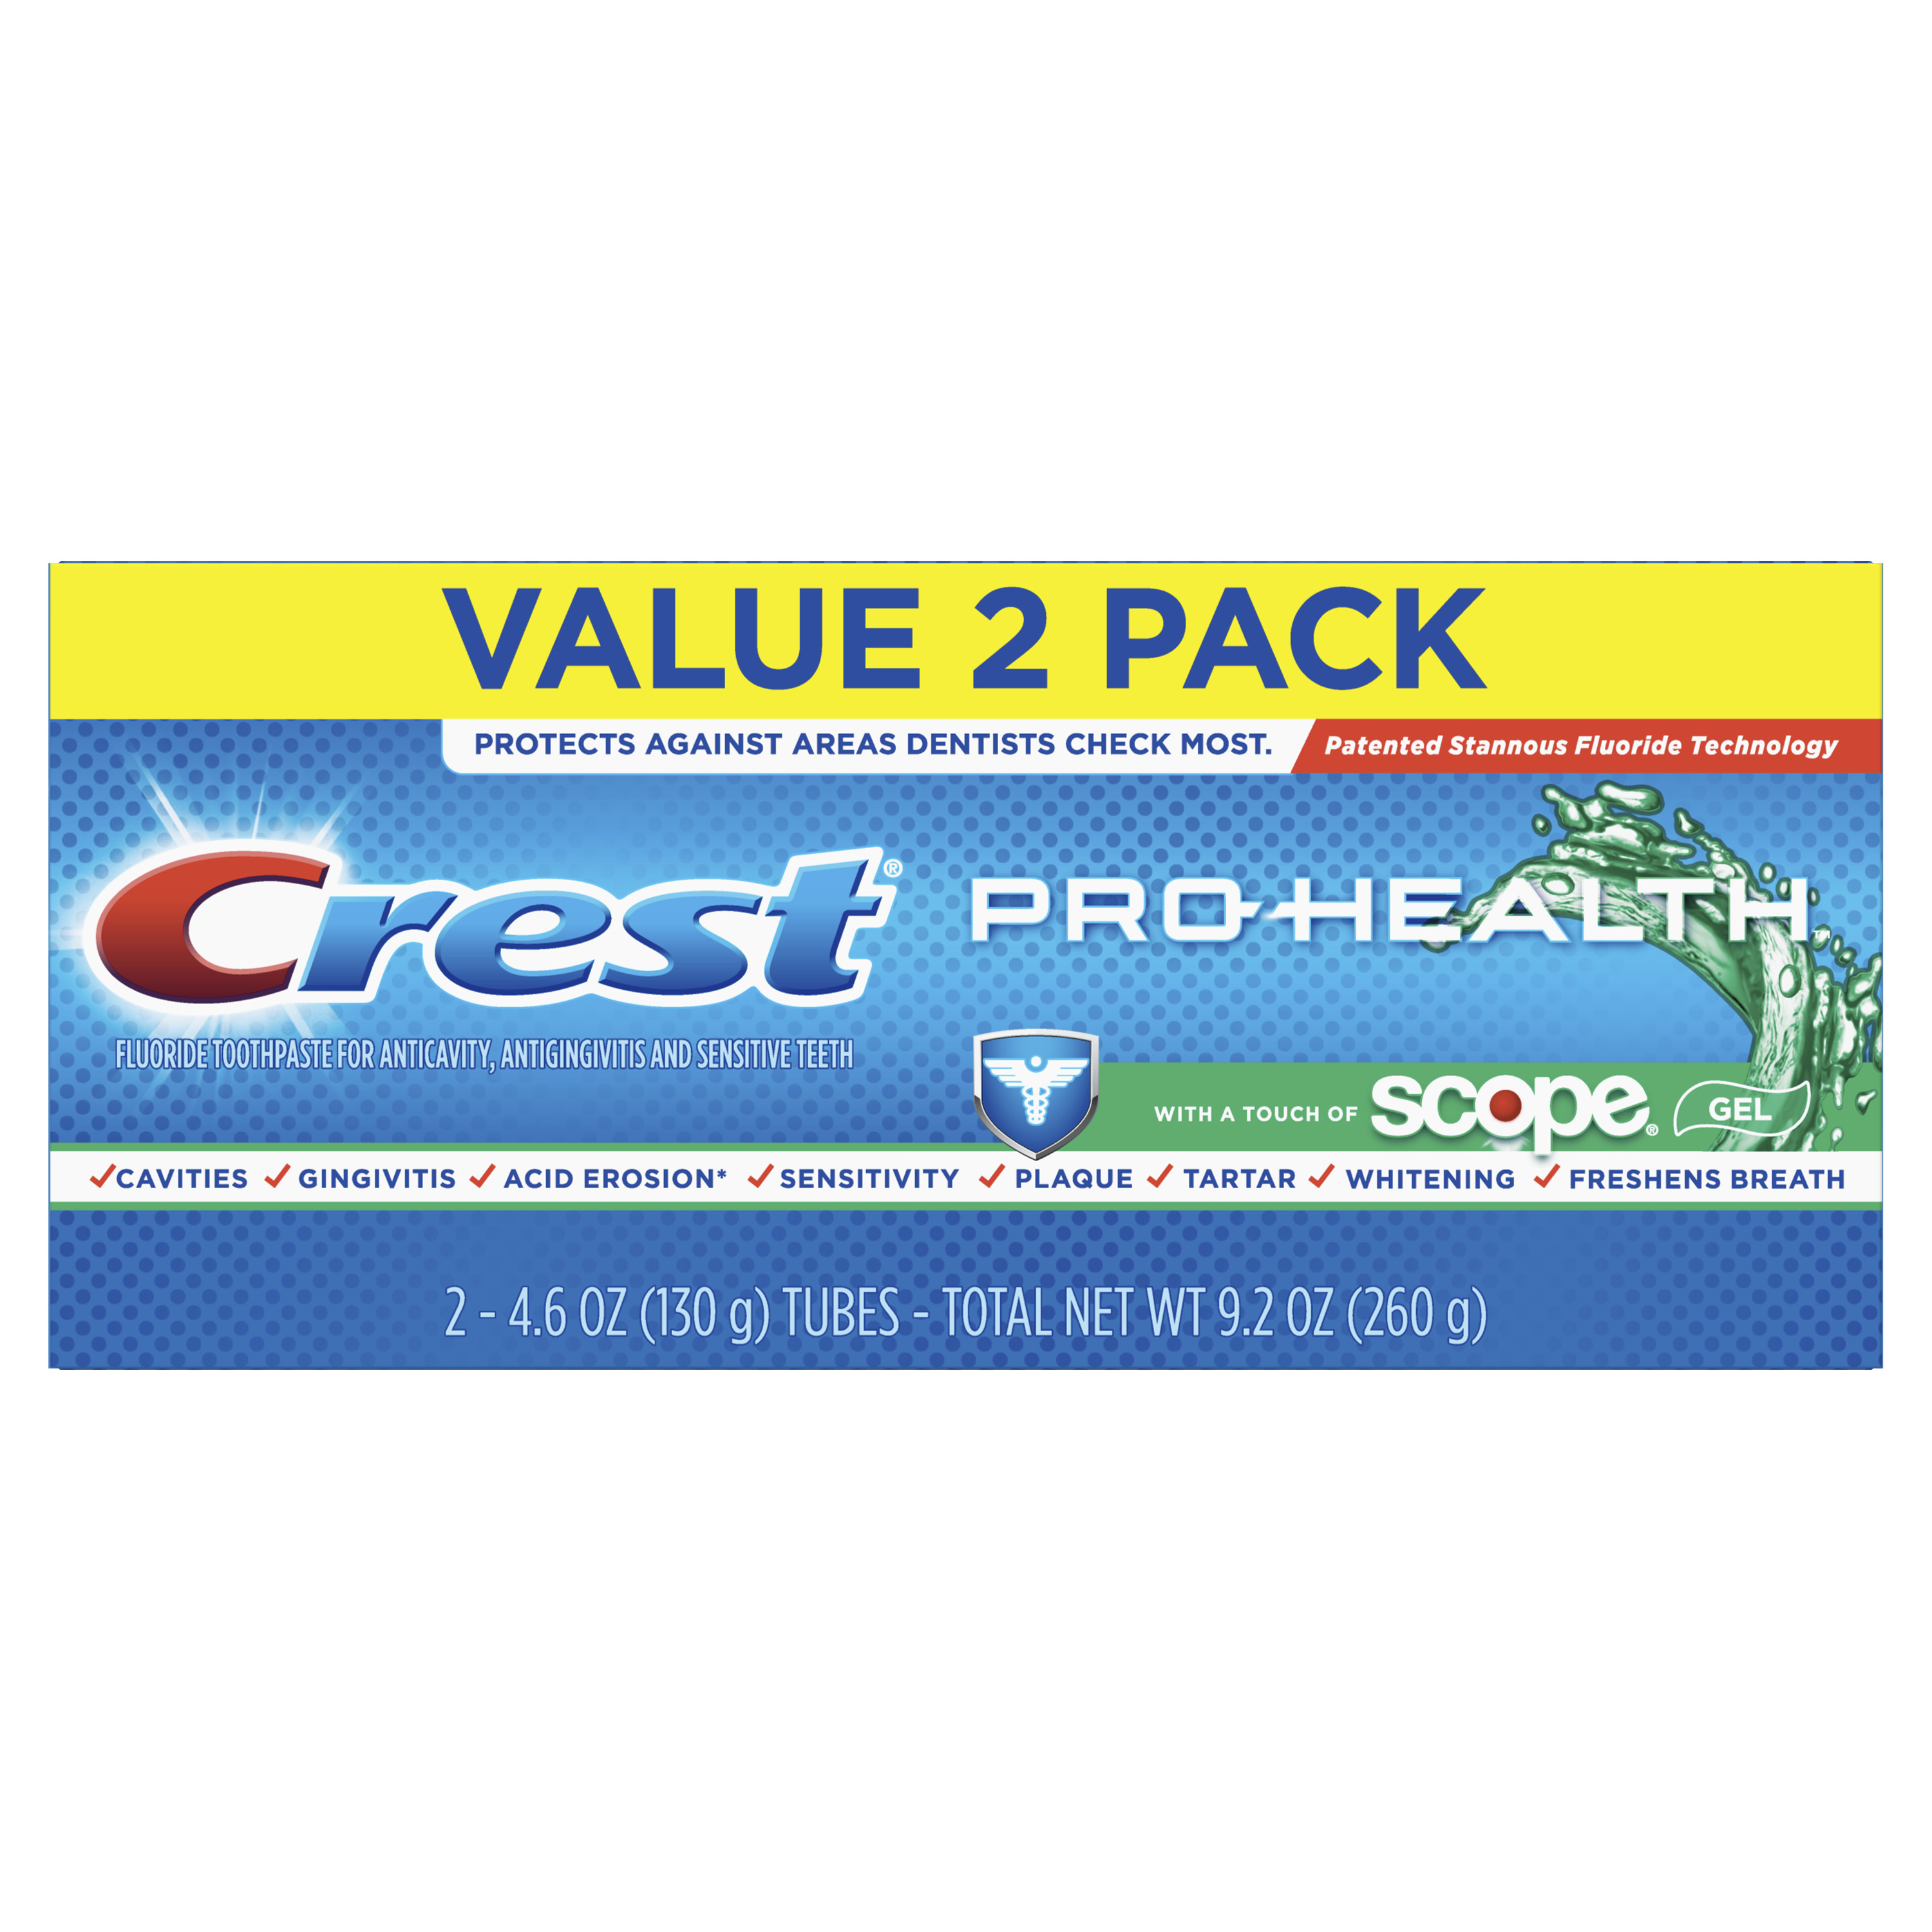 Crest Pro-Health with a Touch of Scope Whitening Toothpaste, 4.6 Oz (2 Pack) - image 1 of 9